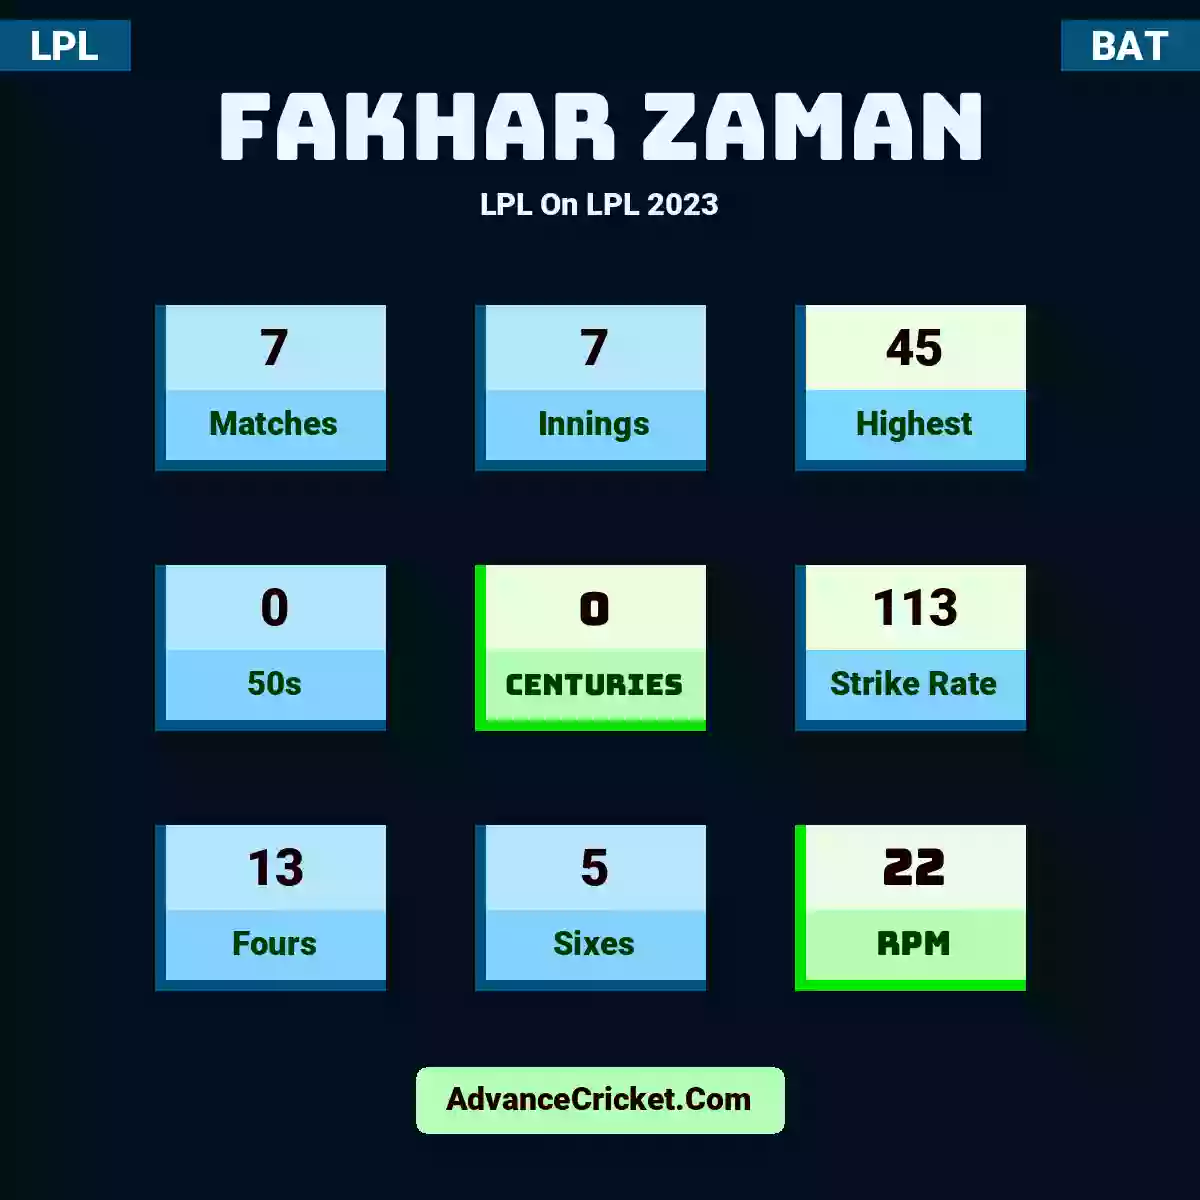 Fakhar Zaman LPL  On LPL 2023, Fakhar Zaman played 7 matches, scored 45 runs as highest, 0 half-centuries, and 0 centuries, with a strike rate of 113. F.Zaman hit 13 fours and 5 sixes, with an RPM of 22.